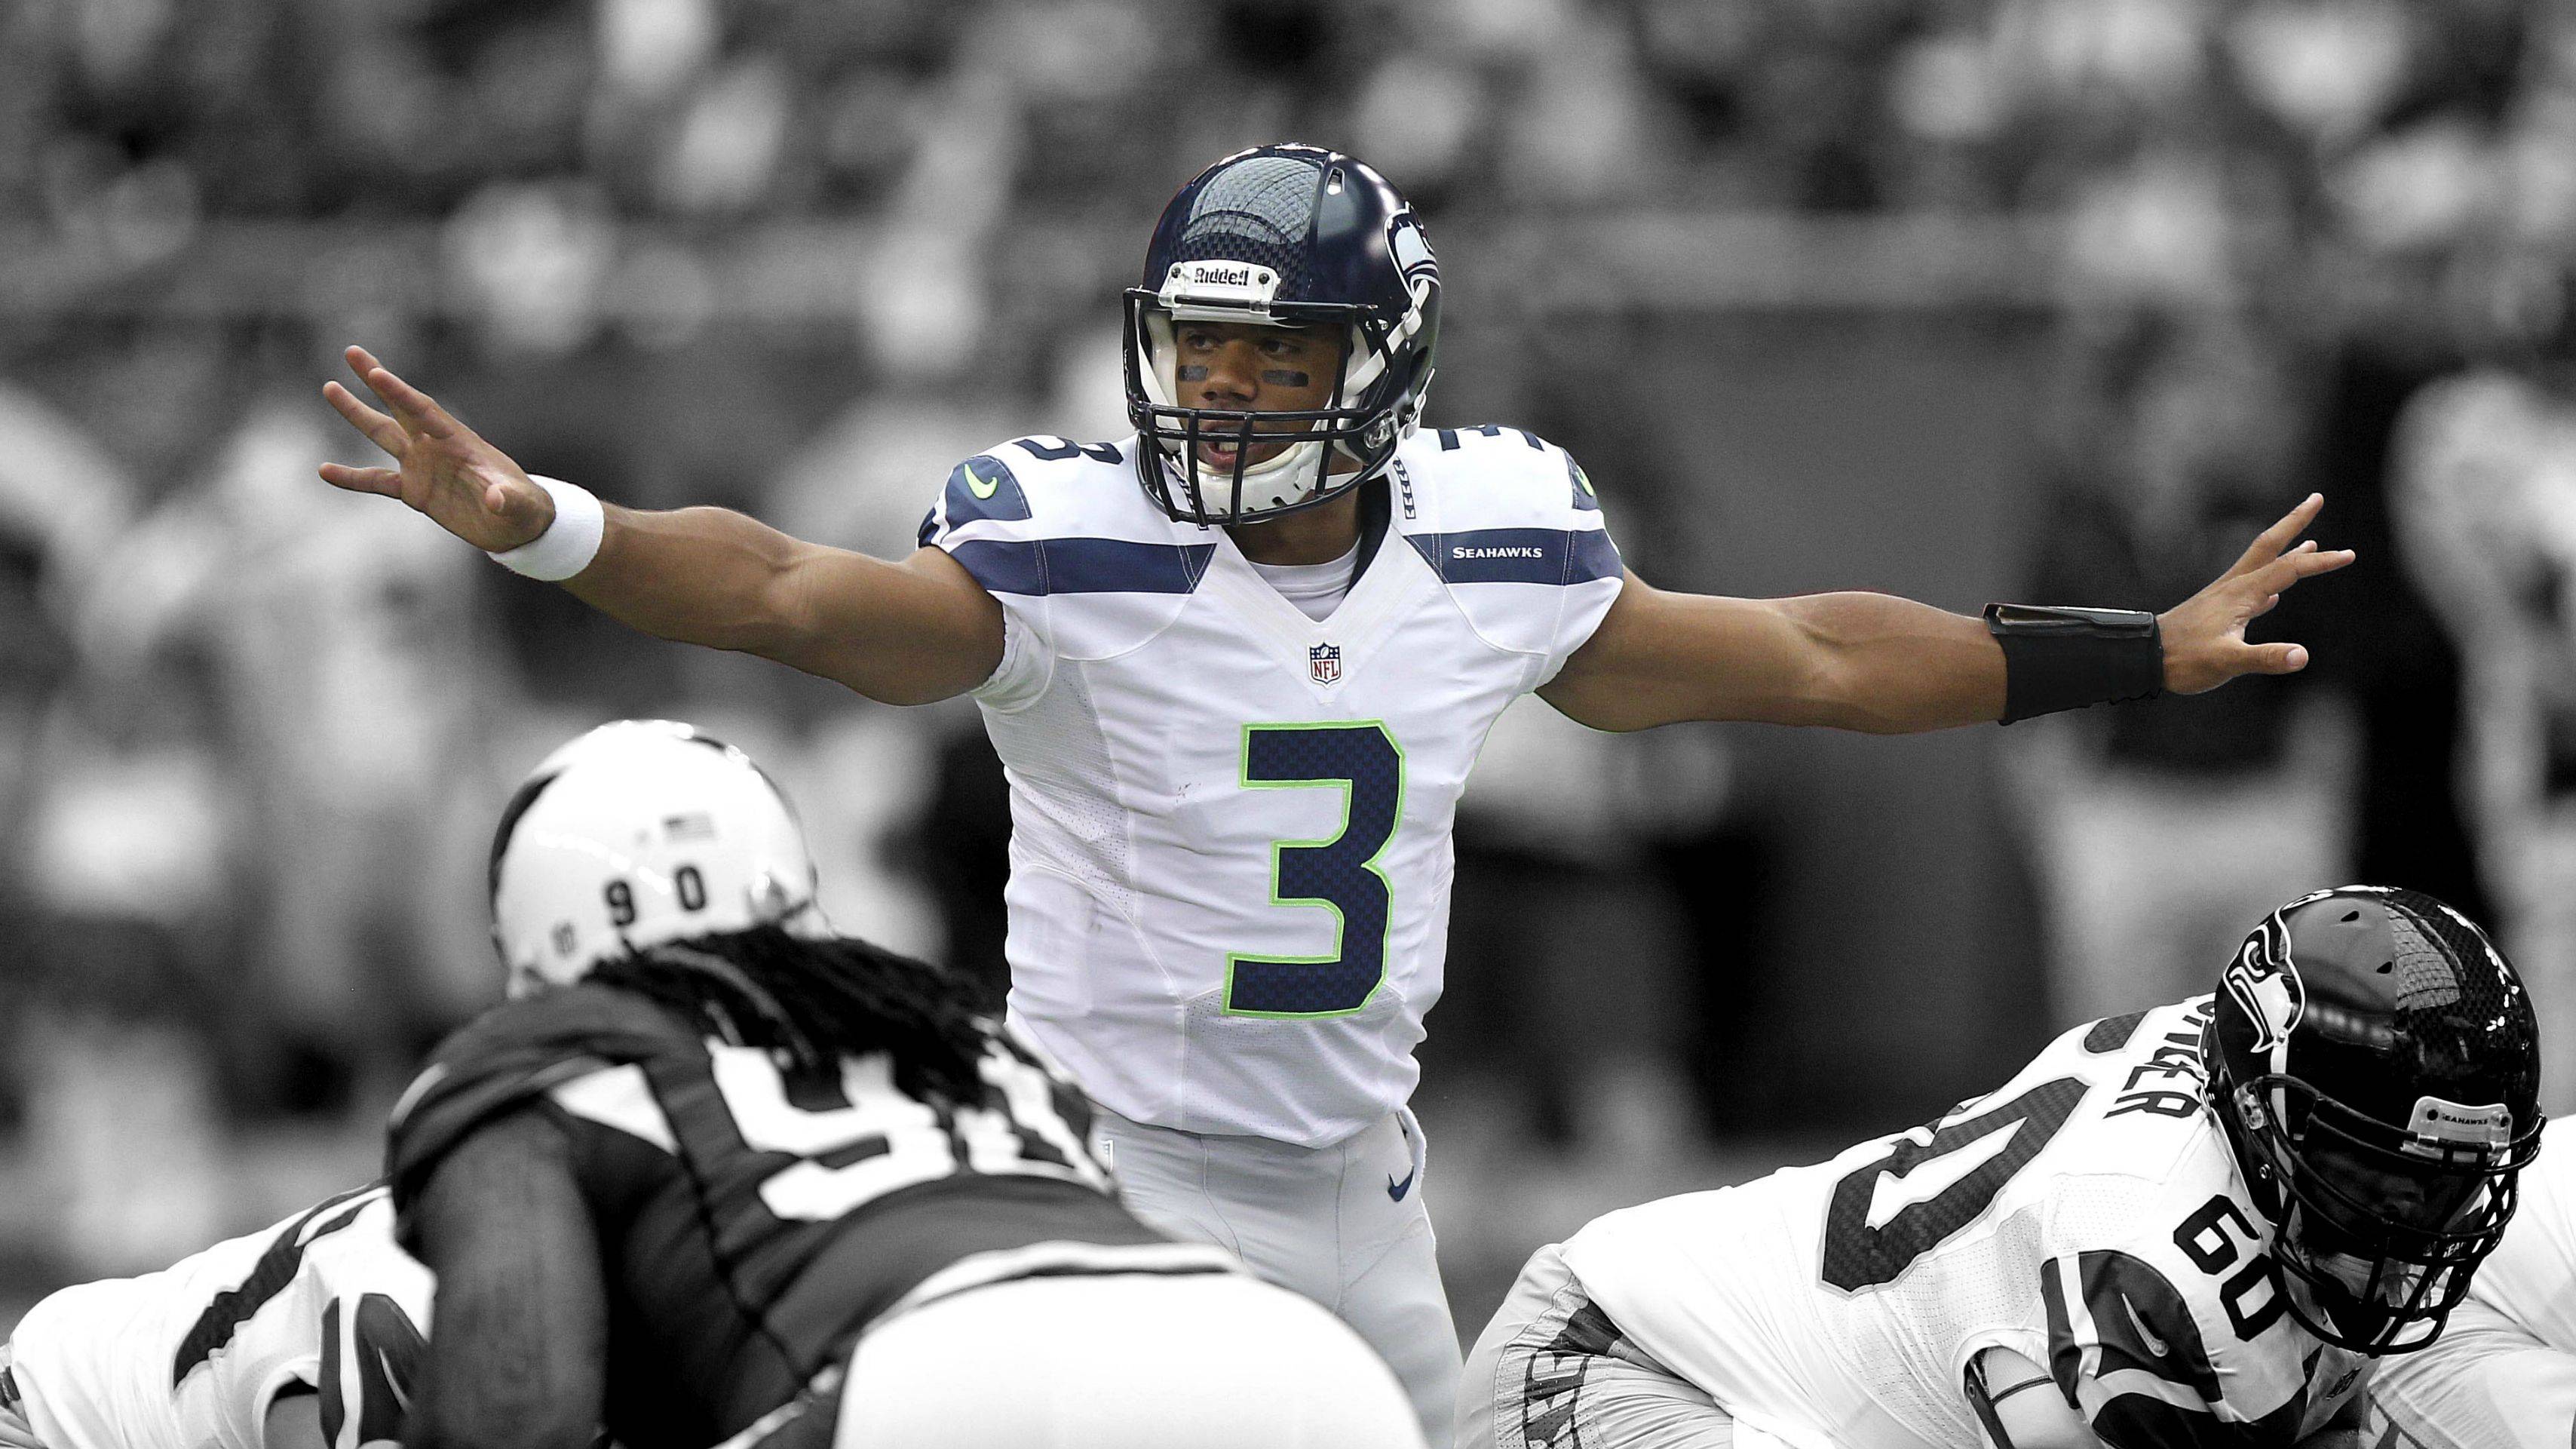 Haven T Found Any Russell Wilson Wallpaper I Liked So Made One